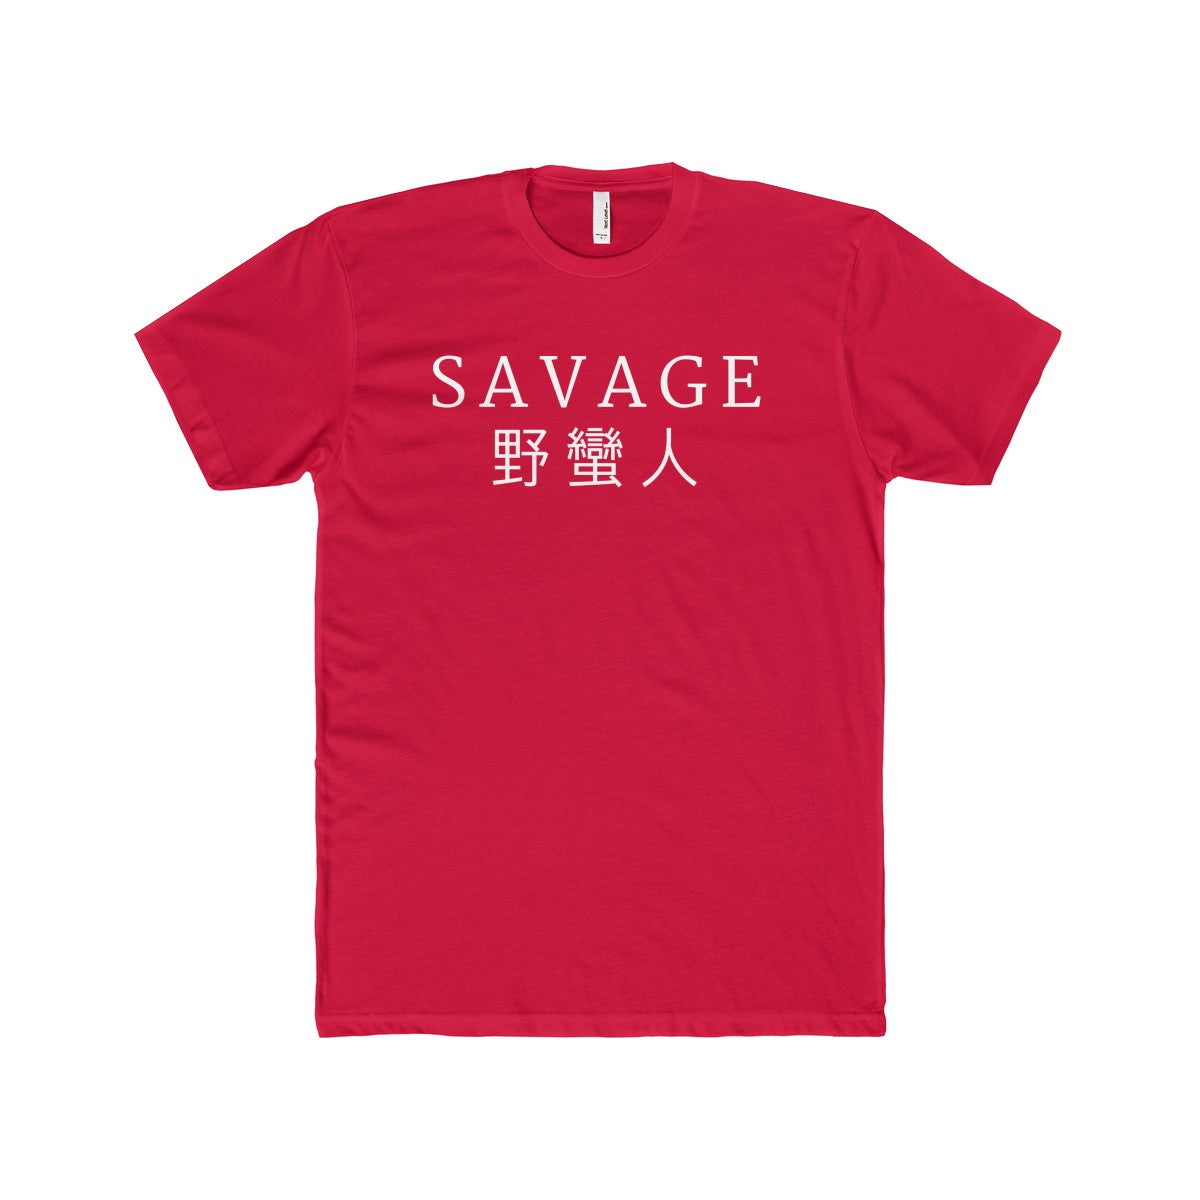 The Absolute Savage | Men's Fitted Tee FL, T-Shirt, SJ Corbyn